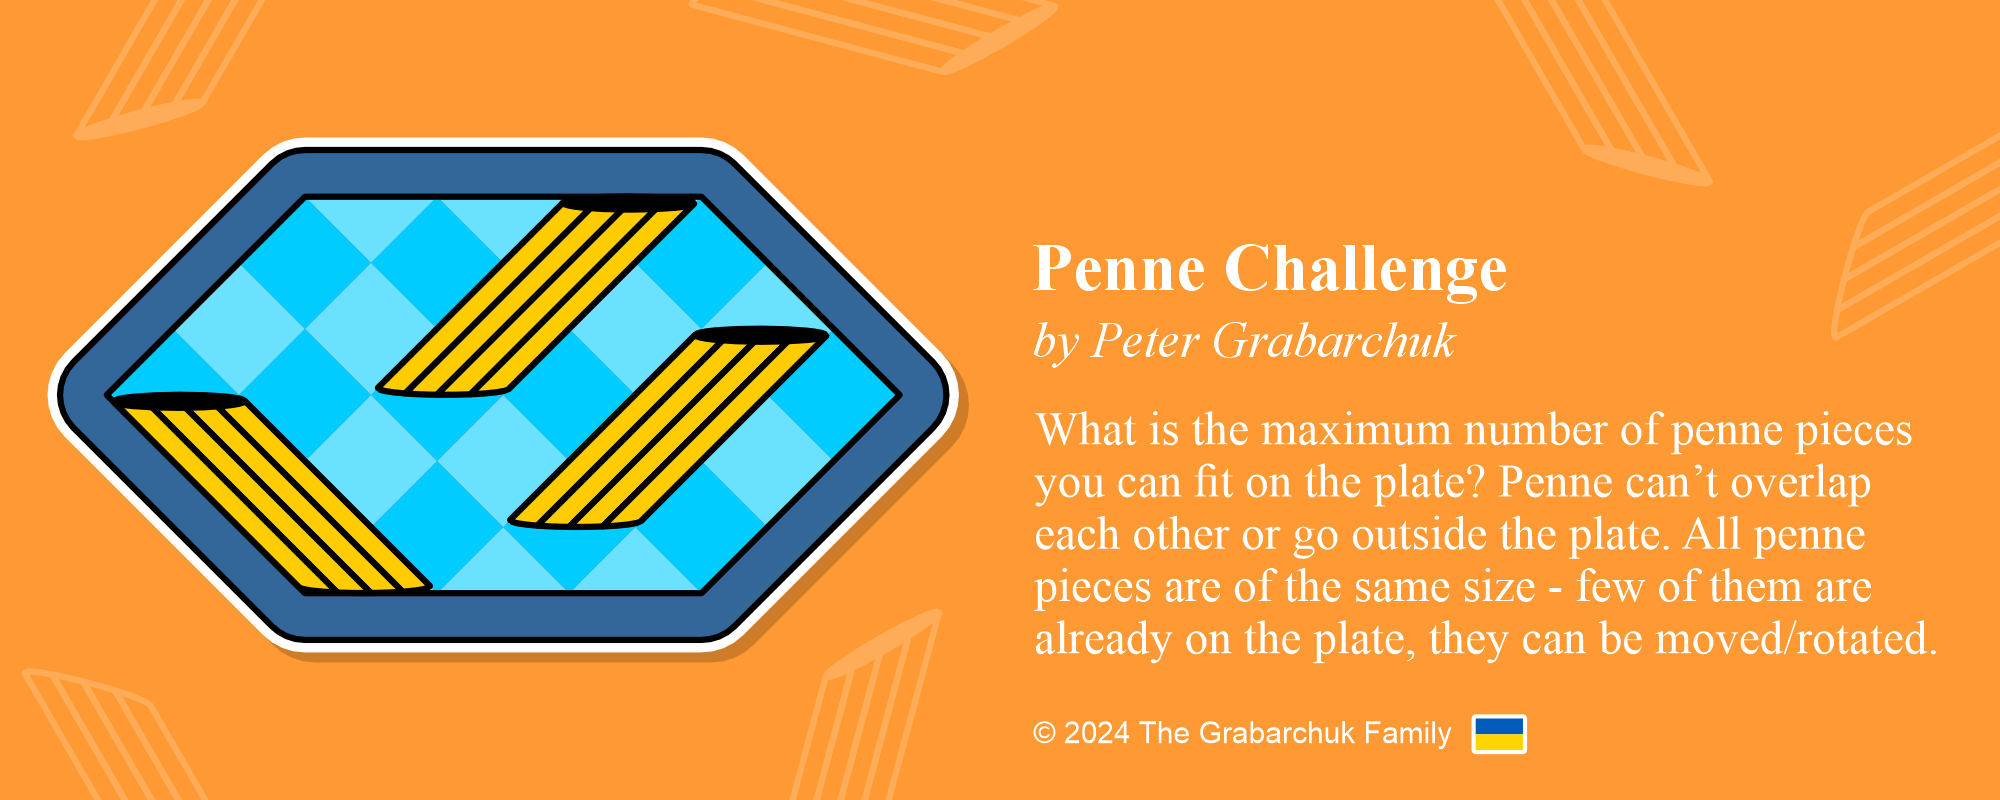 Penne Challenge by Peter Grabarchuk